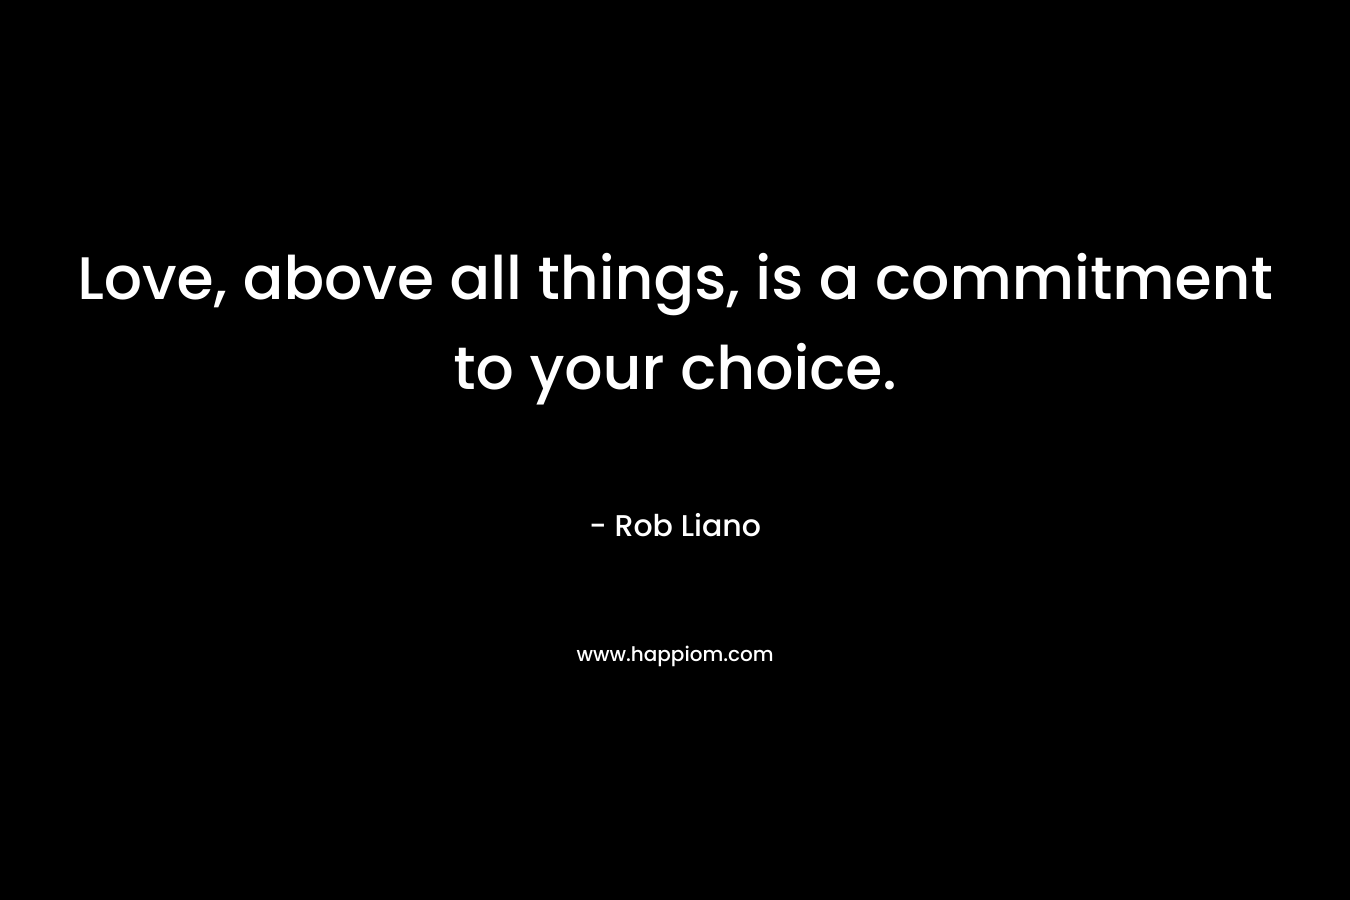 Love, above all things, is a commitment to your choice.